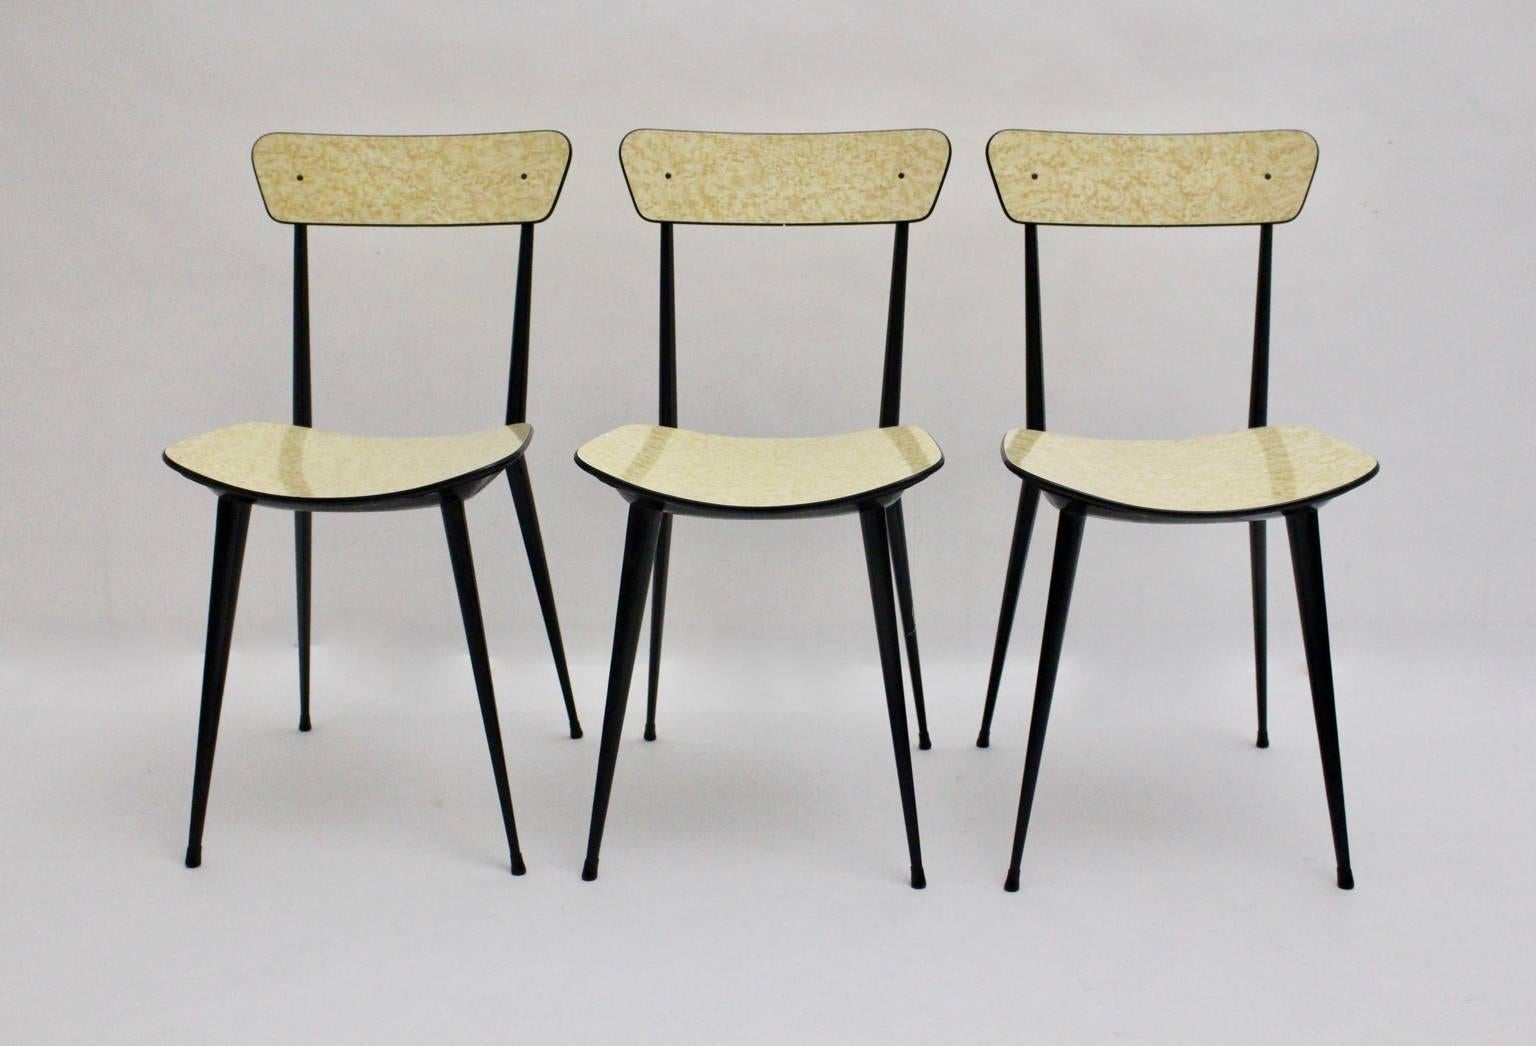 Mid Century Modern set of three dining room chairs very similar to the design by Carlo di Carli.
The base was made of black lacquered metal, while the seat and the back are from formica. Underneath the seat it shows imprinted Brevettato (registered